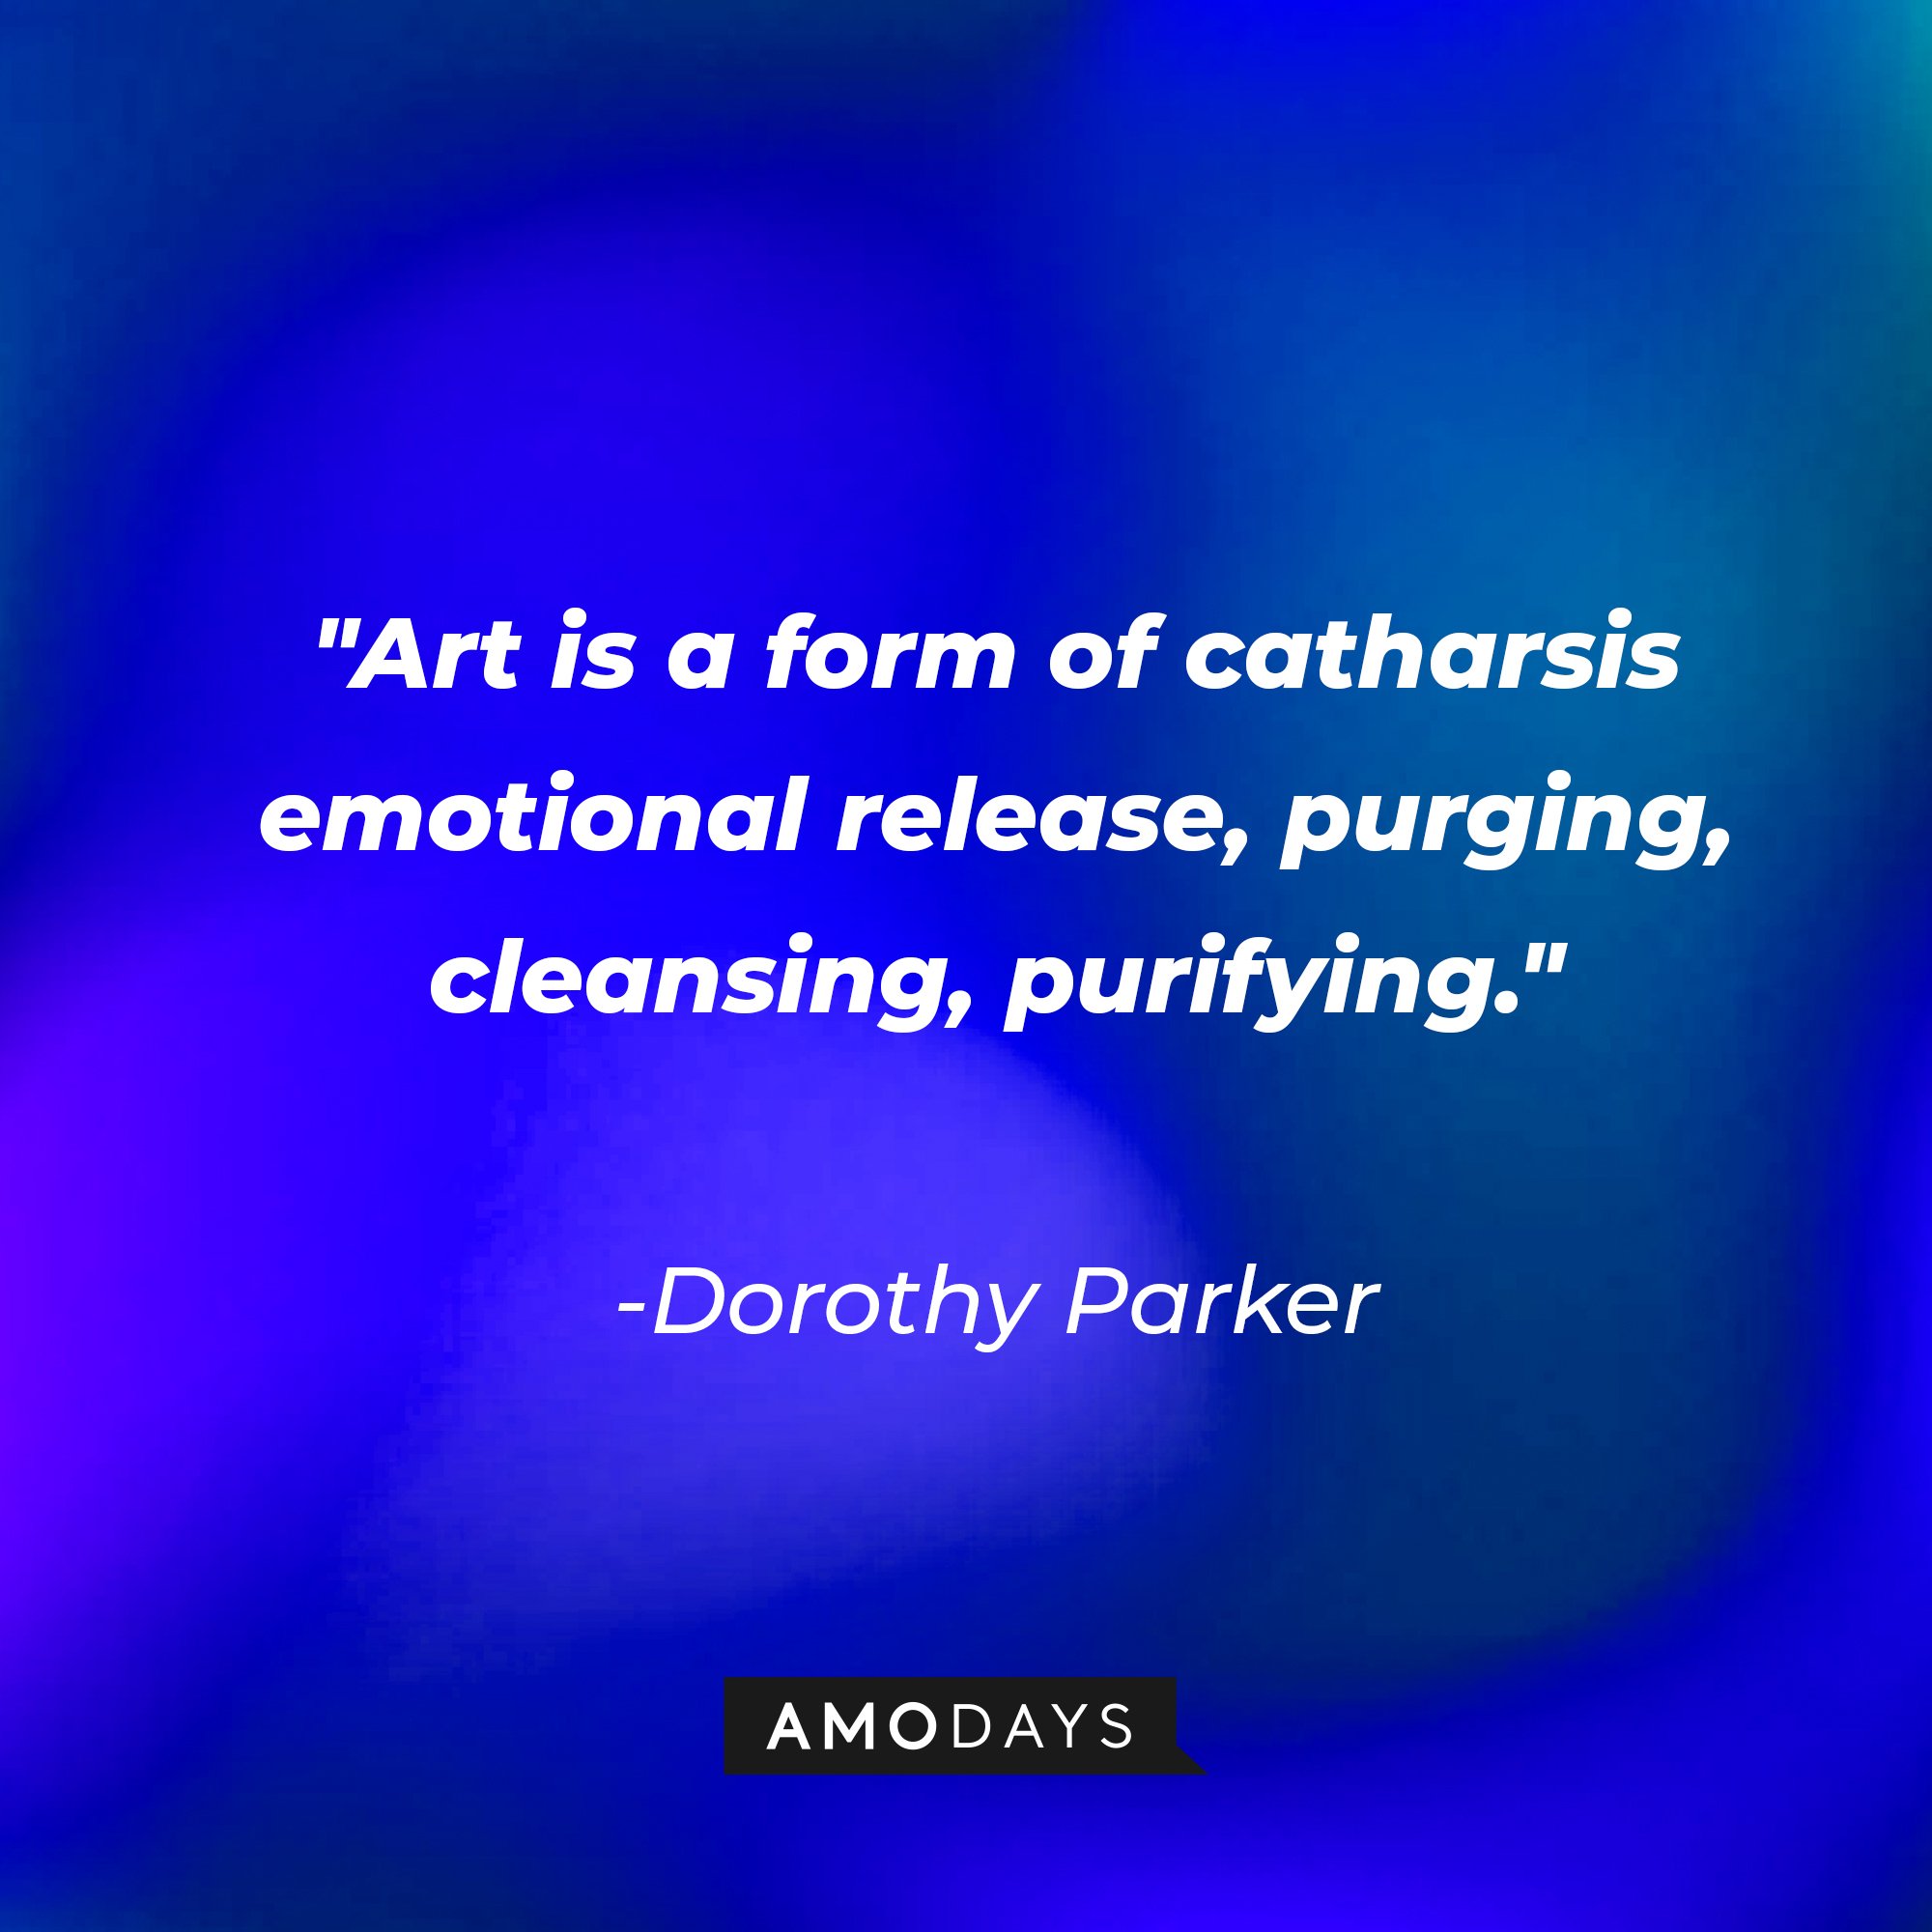 Dorothy Parker’s quote: "Art is a form of catharsis emotional release, purging, cleansing, purifying." | Image: AmoDays   